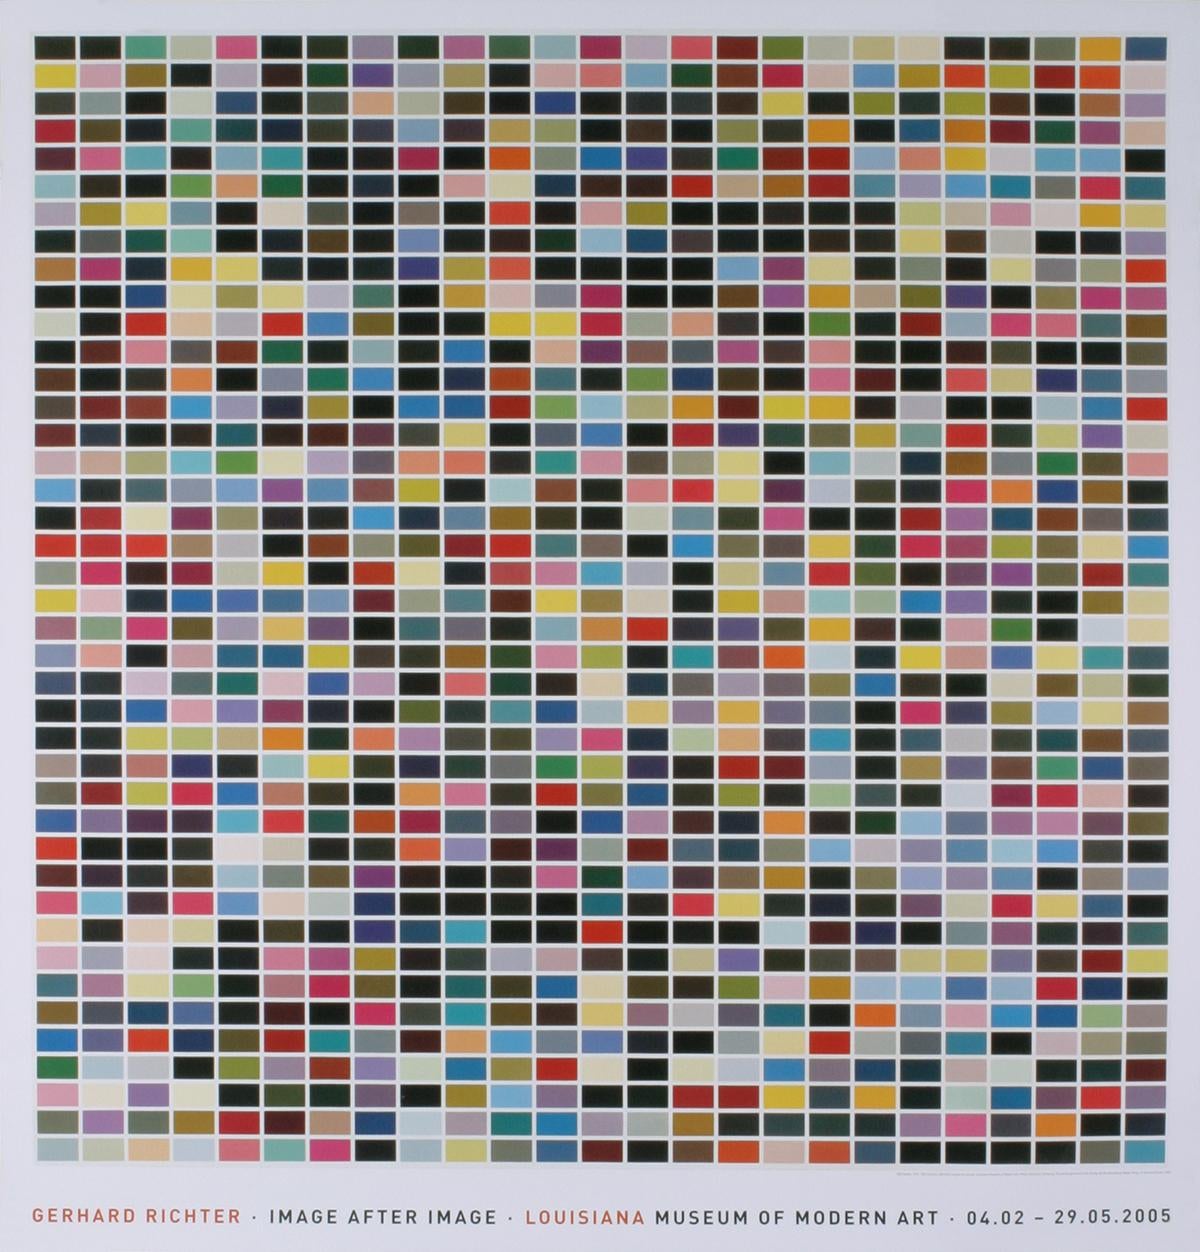 Sku: CB5017
Artist: Gerhard Richter
Title: 1025 Colors (1025 Farben)
Year: 2013
Signed: No
Medium: Offset Lithograph
Paper Size: 48 x 46 inches ( 121.92 x 116.84 cm )
Image Size: 43.75 x 43.5 inches ( 111.125 x 110.49 cm )
Edition Size: 500
Framed: